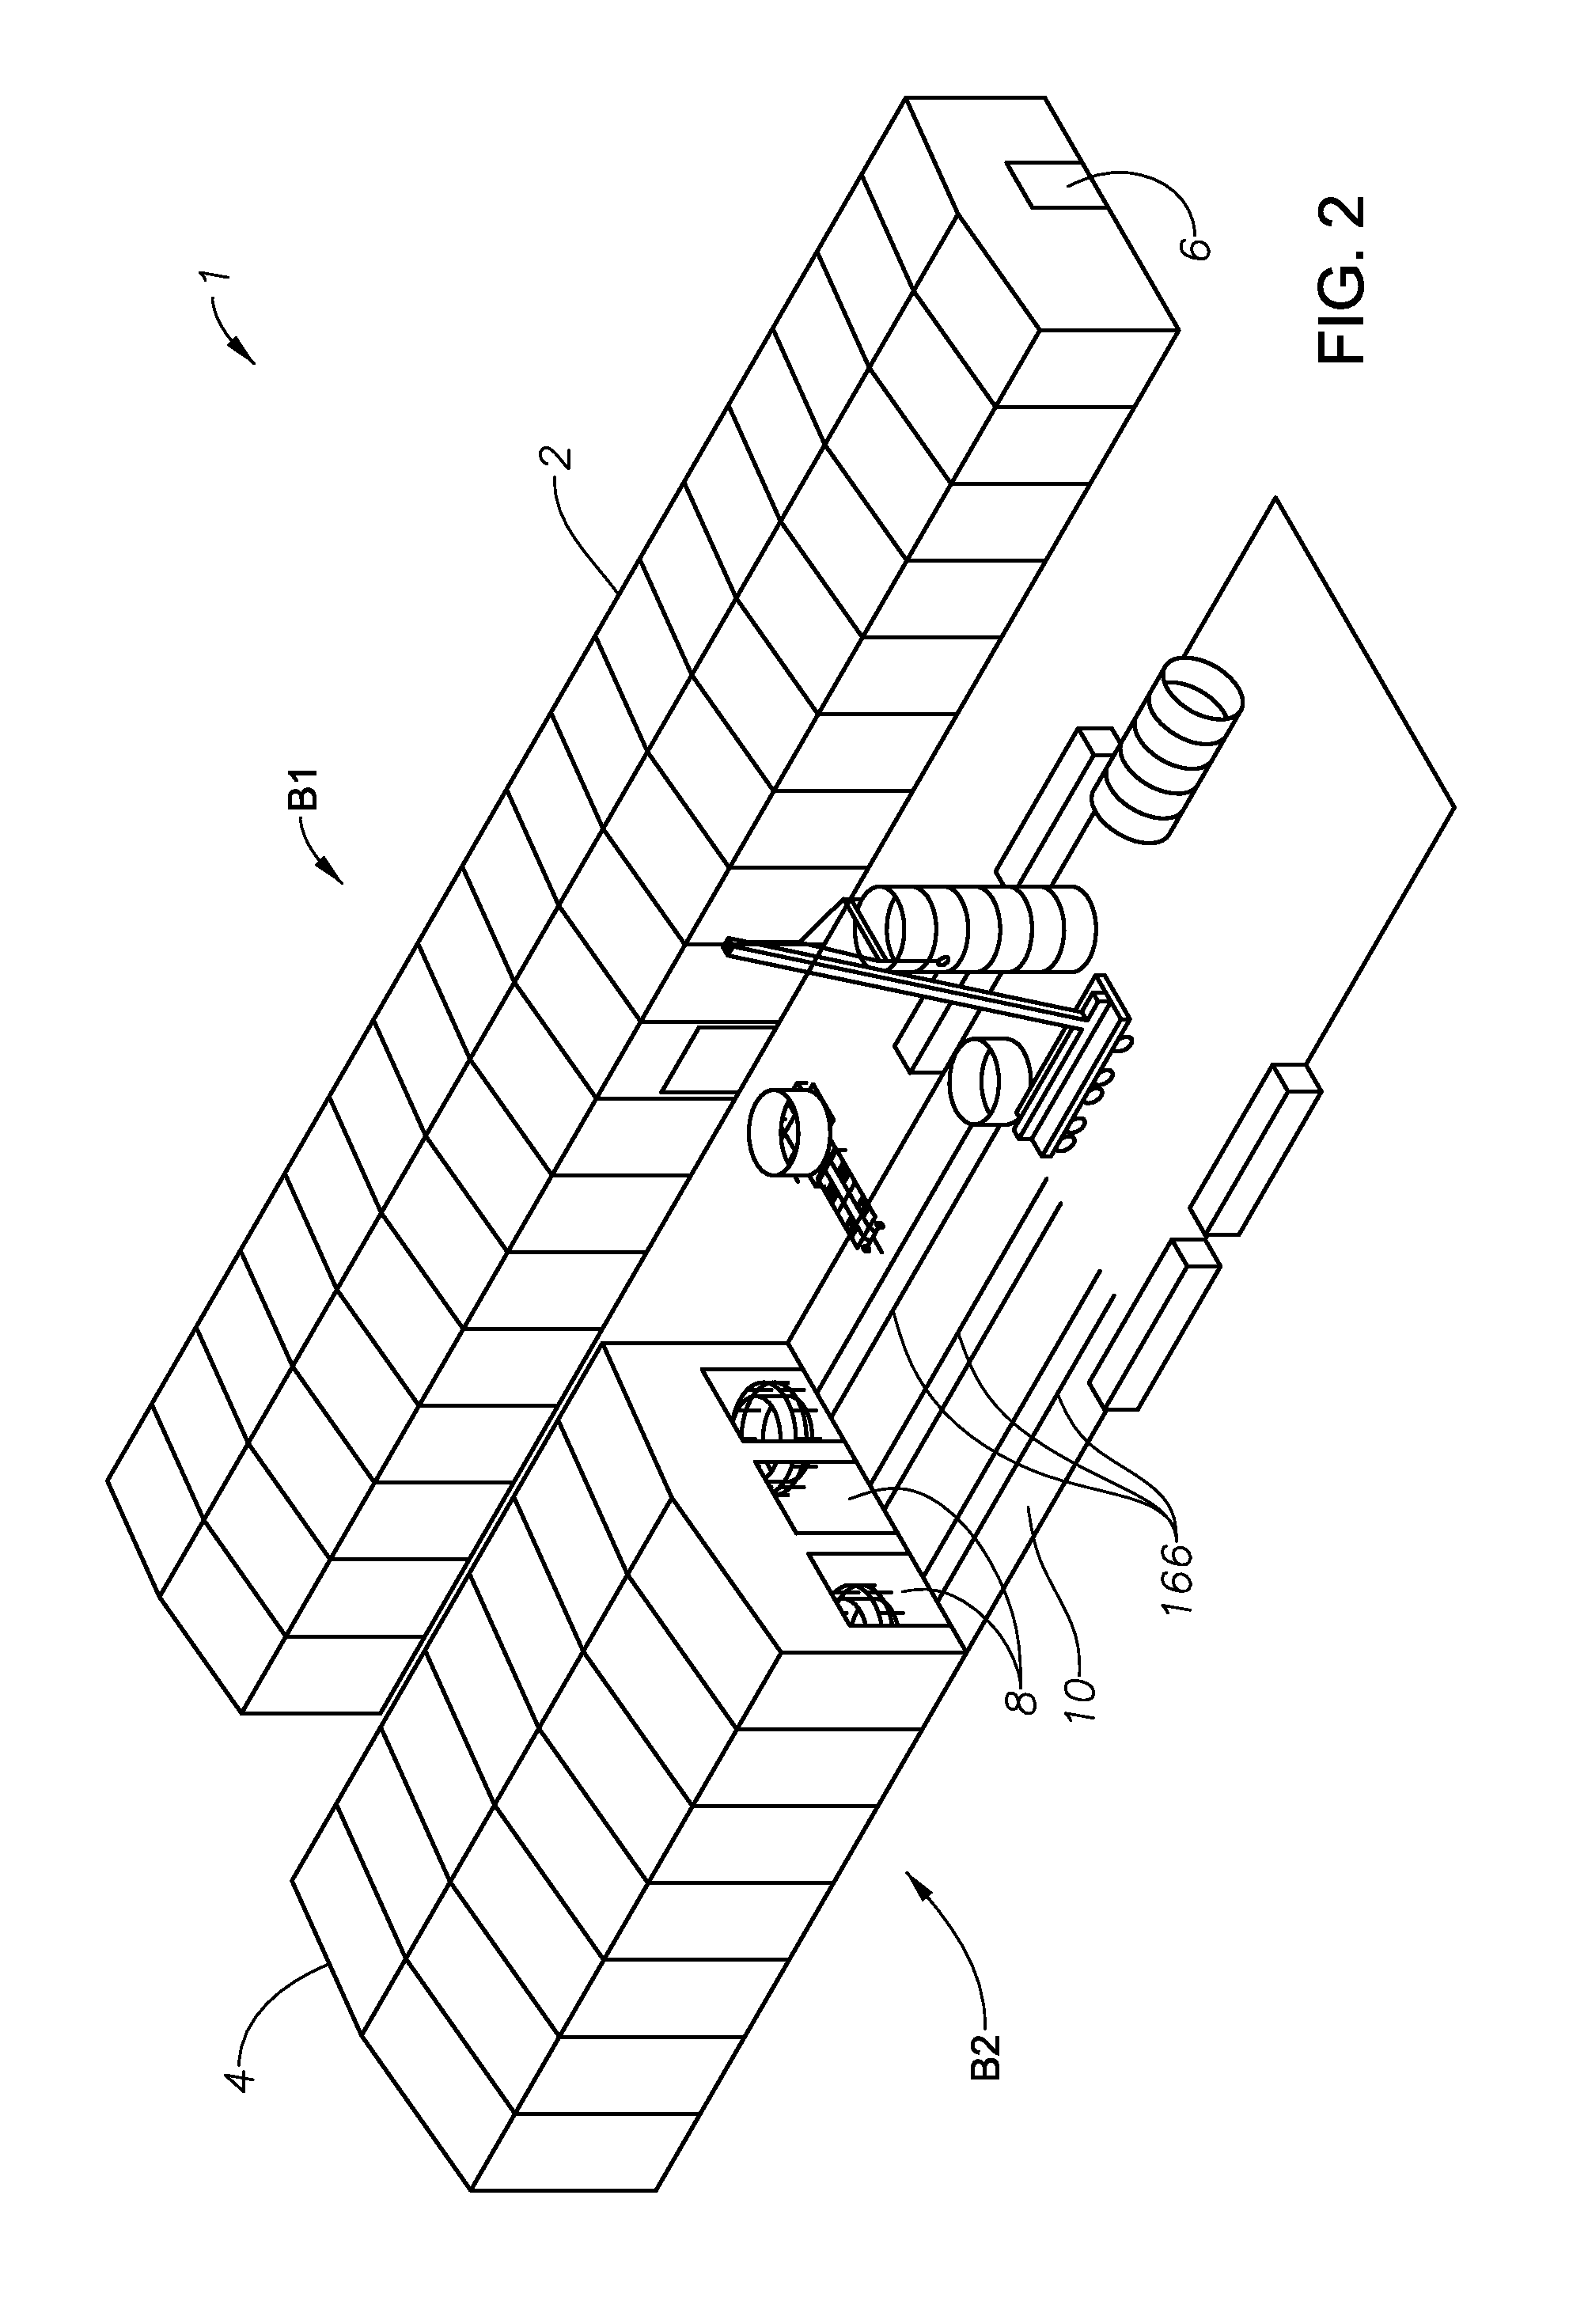 Method for moving a packed section about a remote manufacturing yard